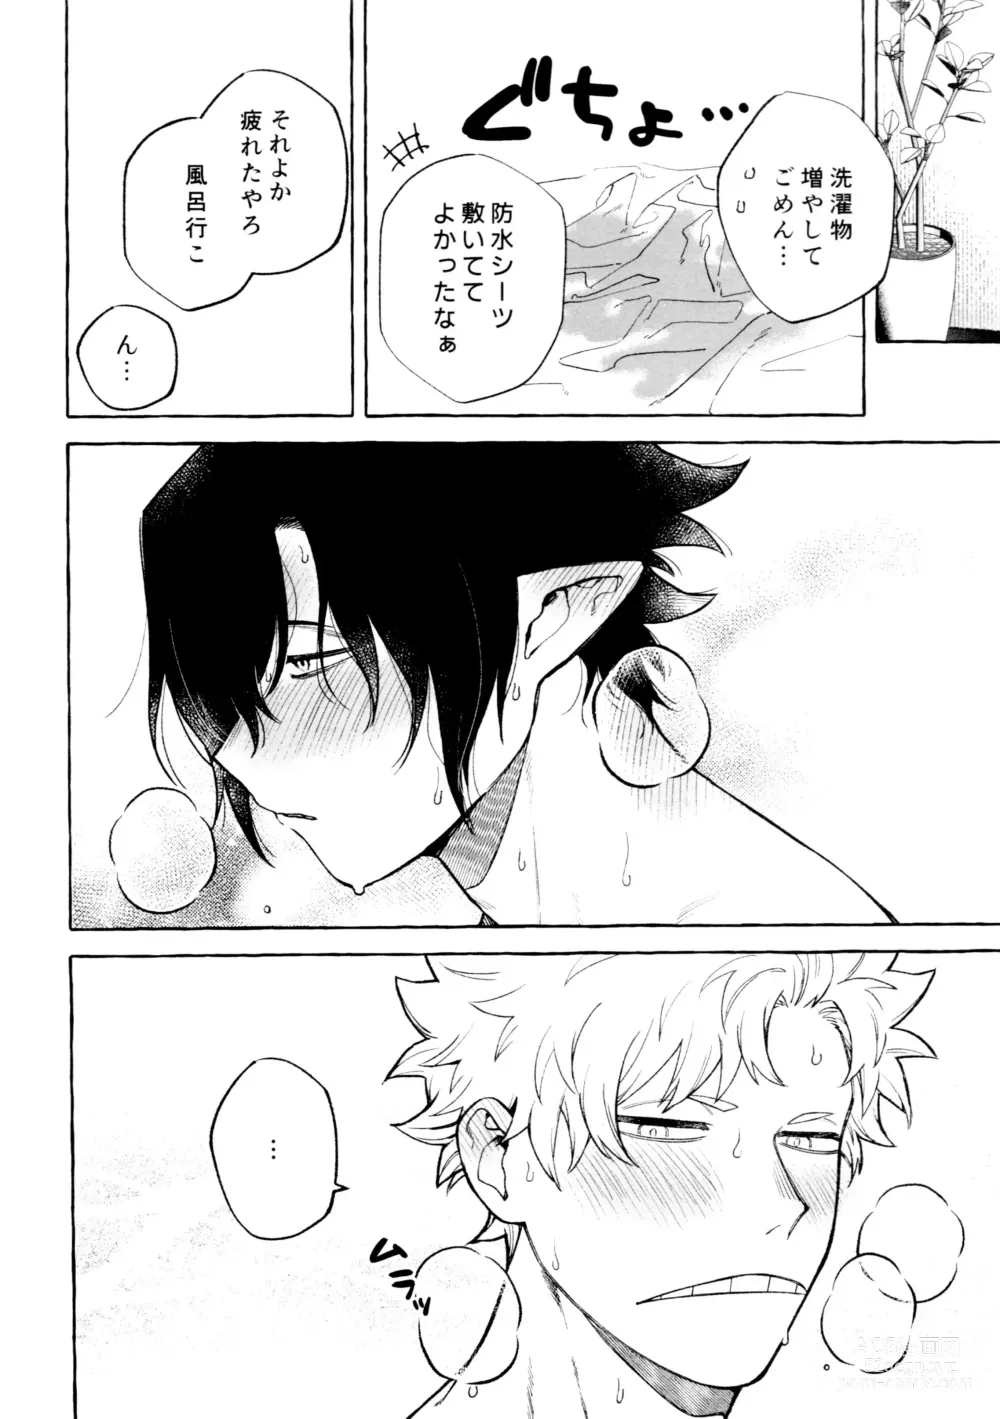 Page 32 of doujinshi Please please